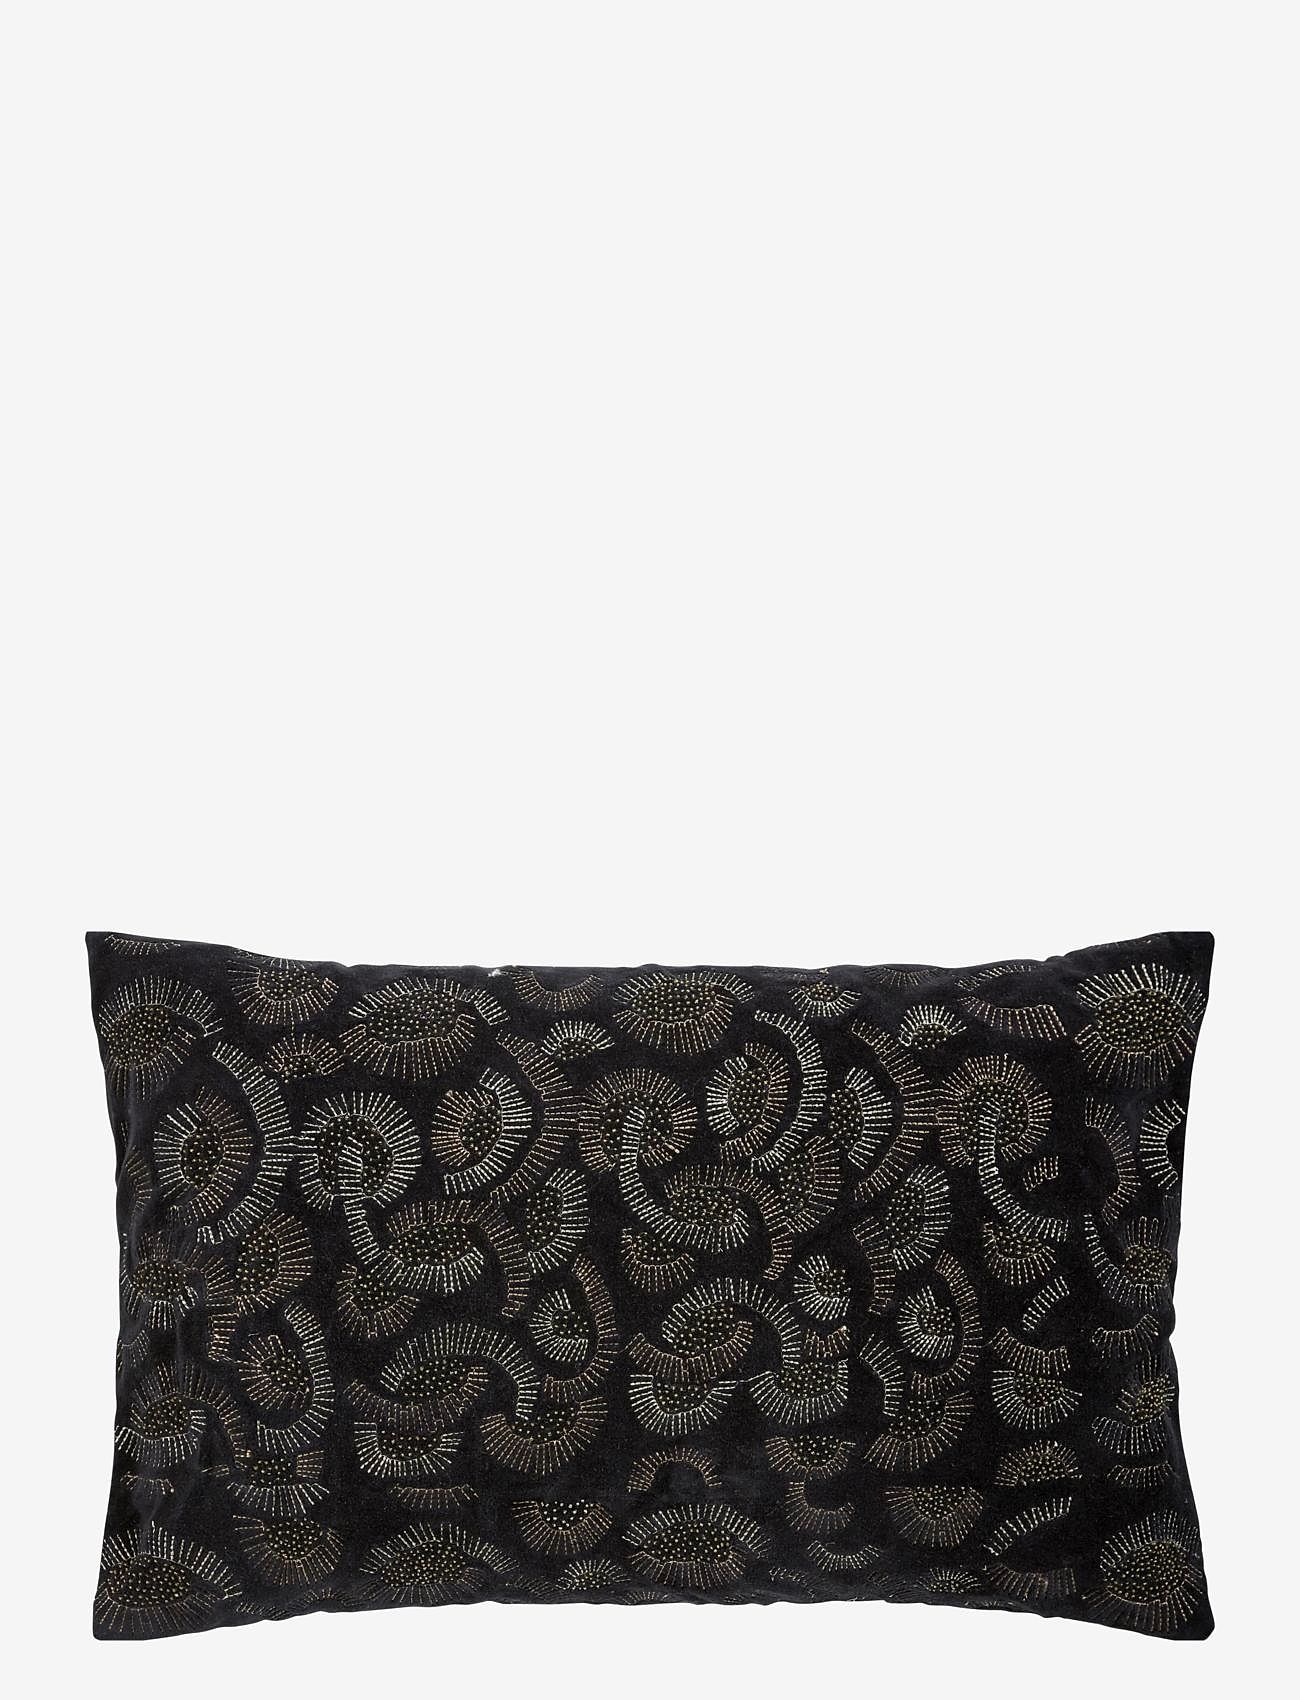 Jakobsdals - Pure decor Cushion cover - cushion covers - black - 0